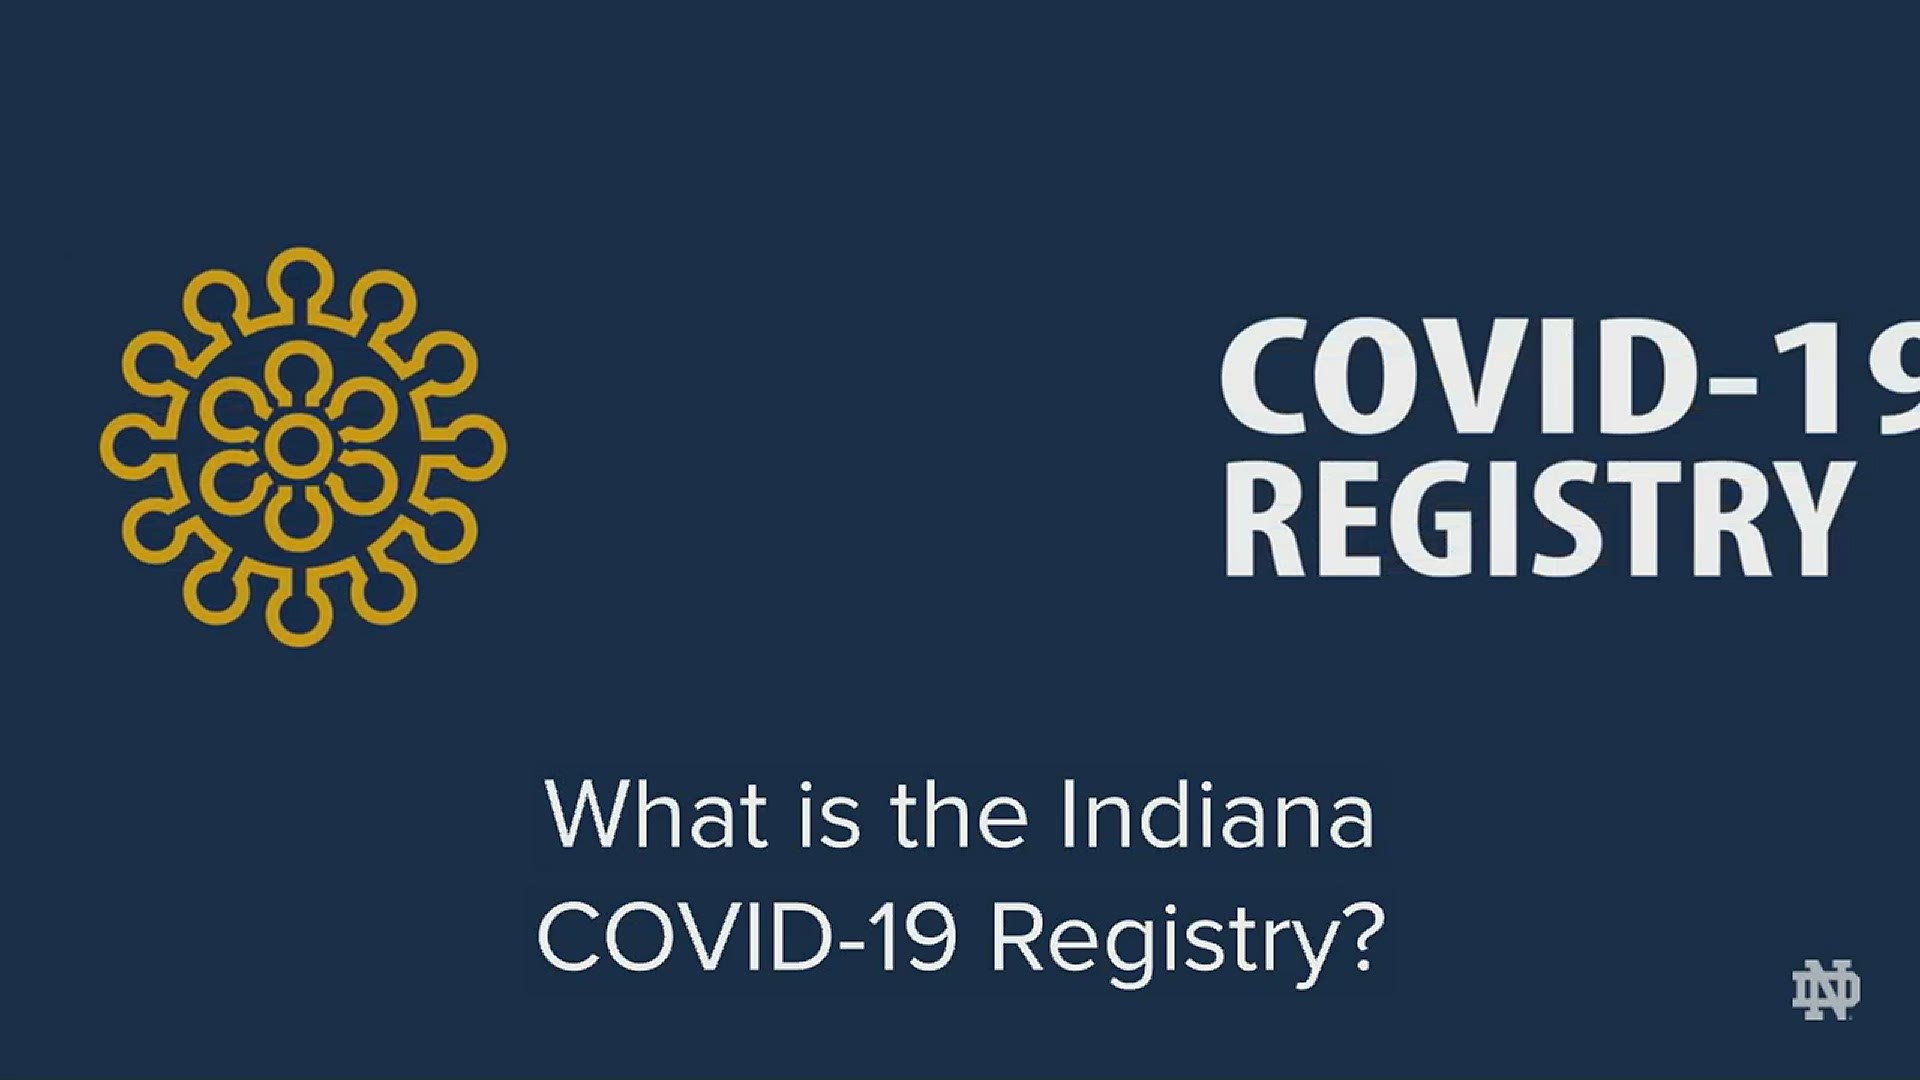 The Indiana COVID-19 Registry is a research study that provides real-time information on the spread of COVID-19, who is being affected, and how.